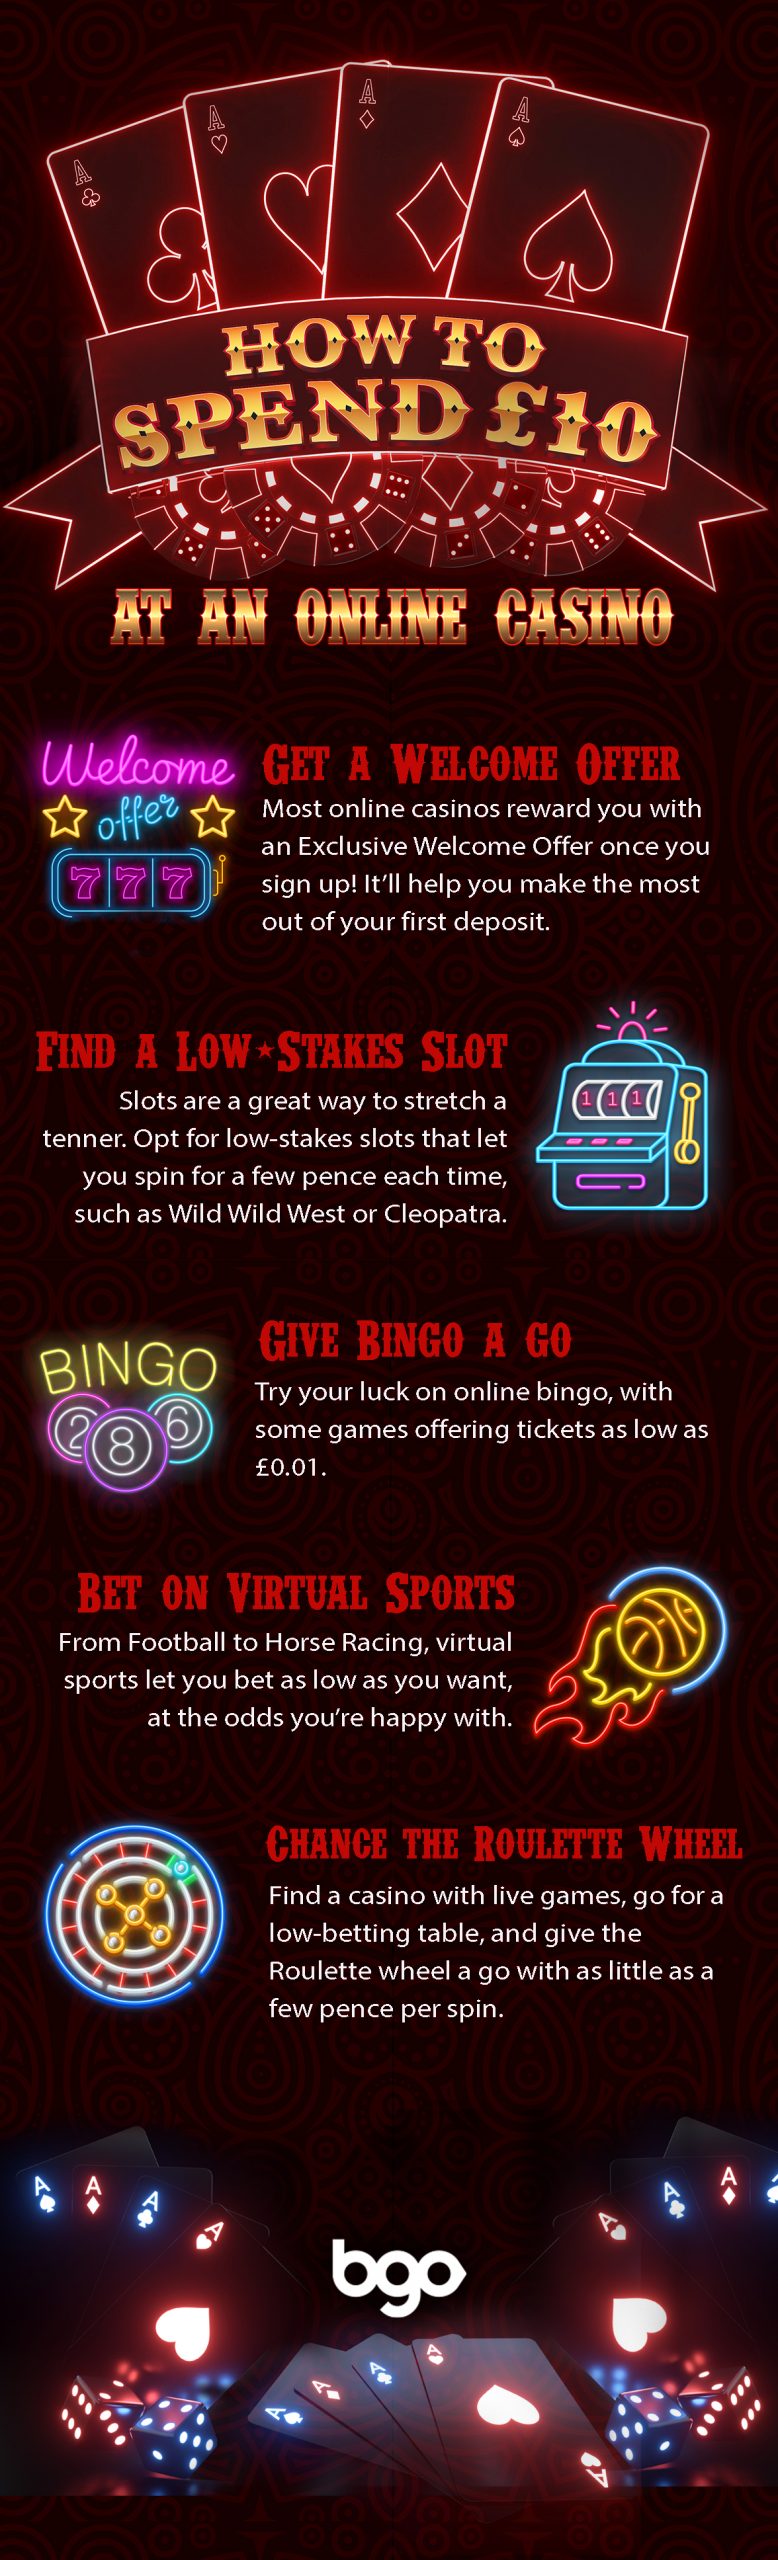 Looking for ideas on how to spend £10 at an online casino